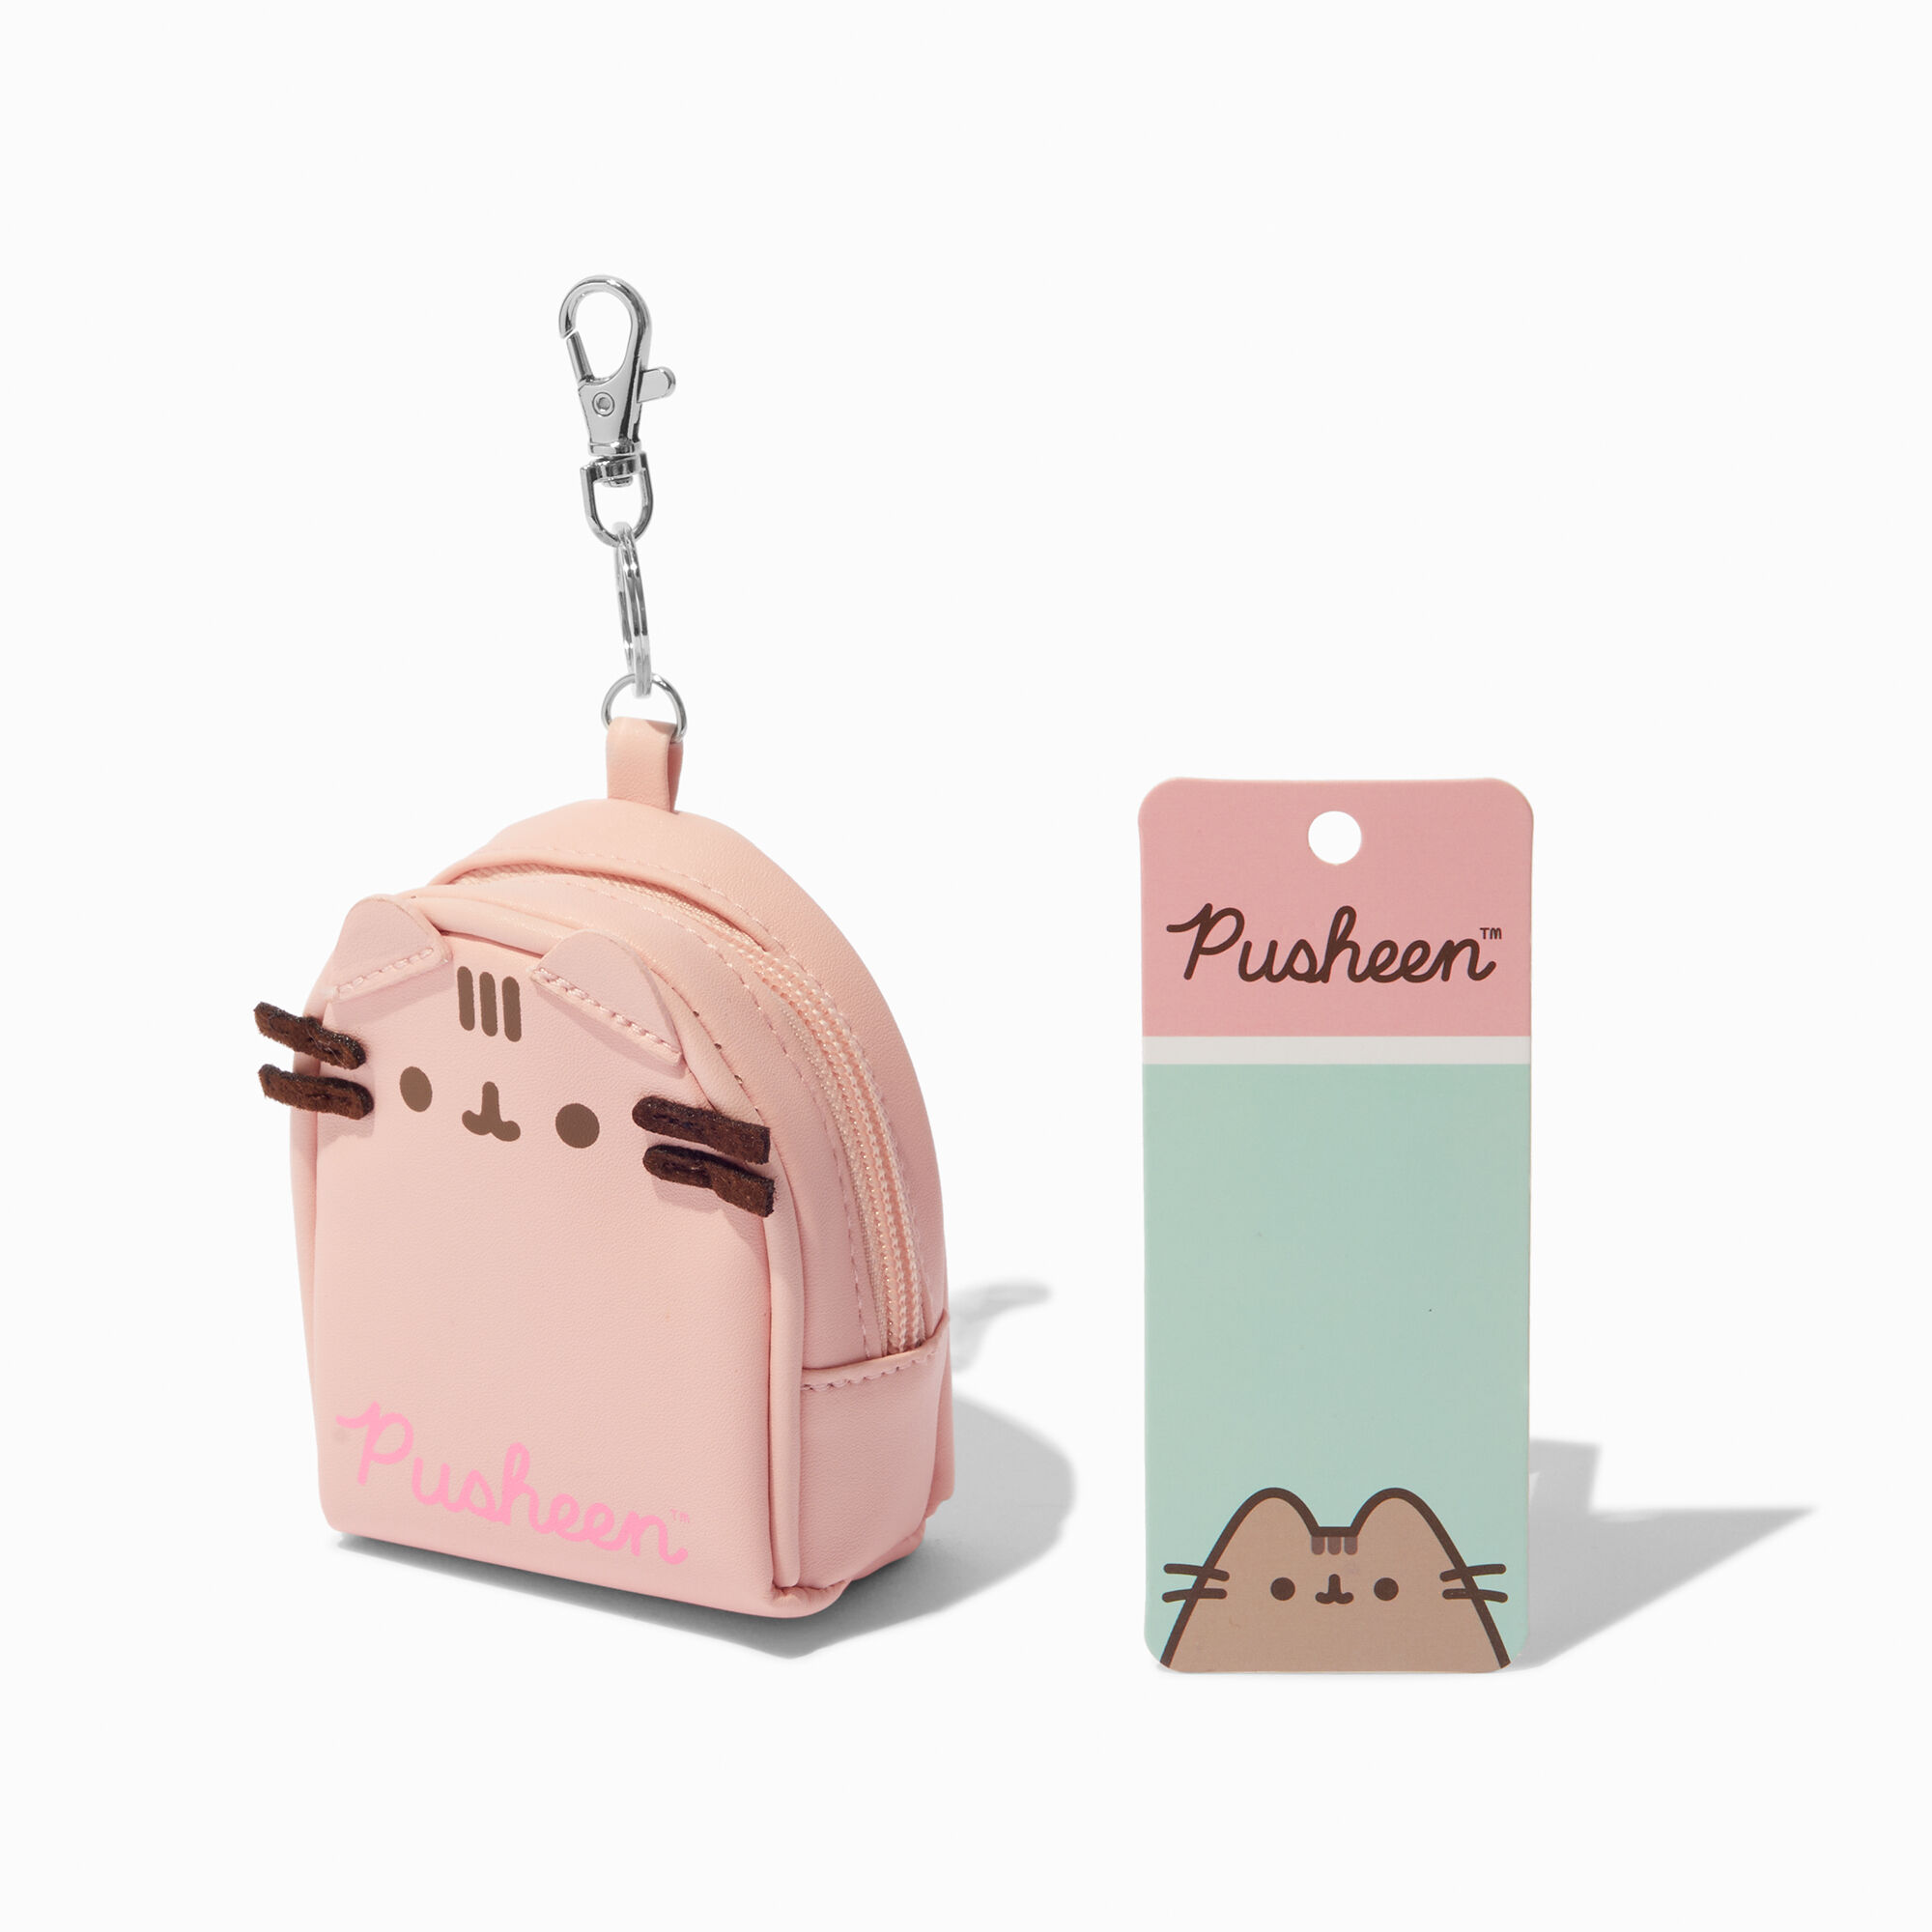 View Claires Pusheen Mini Backpack Keyring information